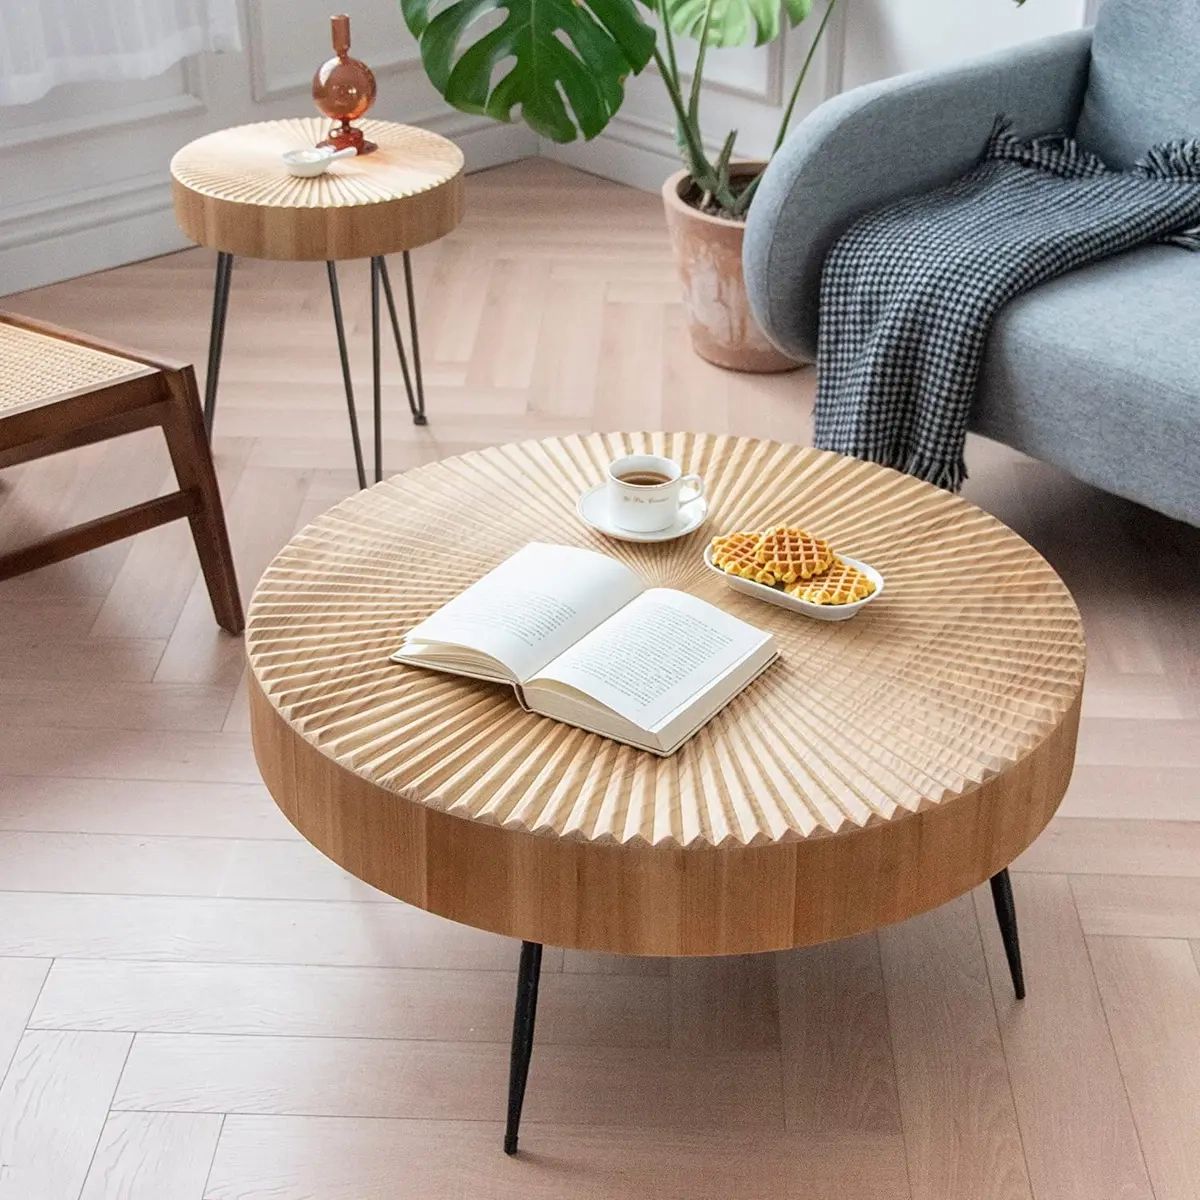 2 Piece Modern Farmhouse Living Room Coffee Table Set, Nesting Table Round  With | Ebay In Modern Farmhouse Coffee Table Sets (View 2 of 15)